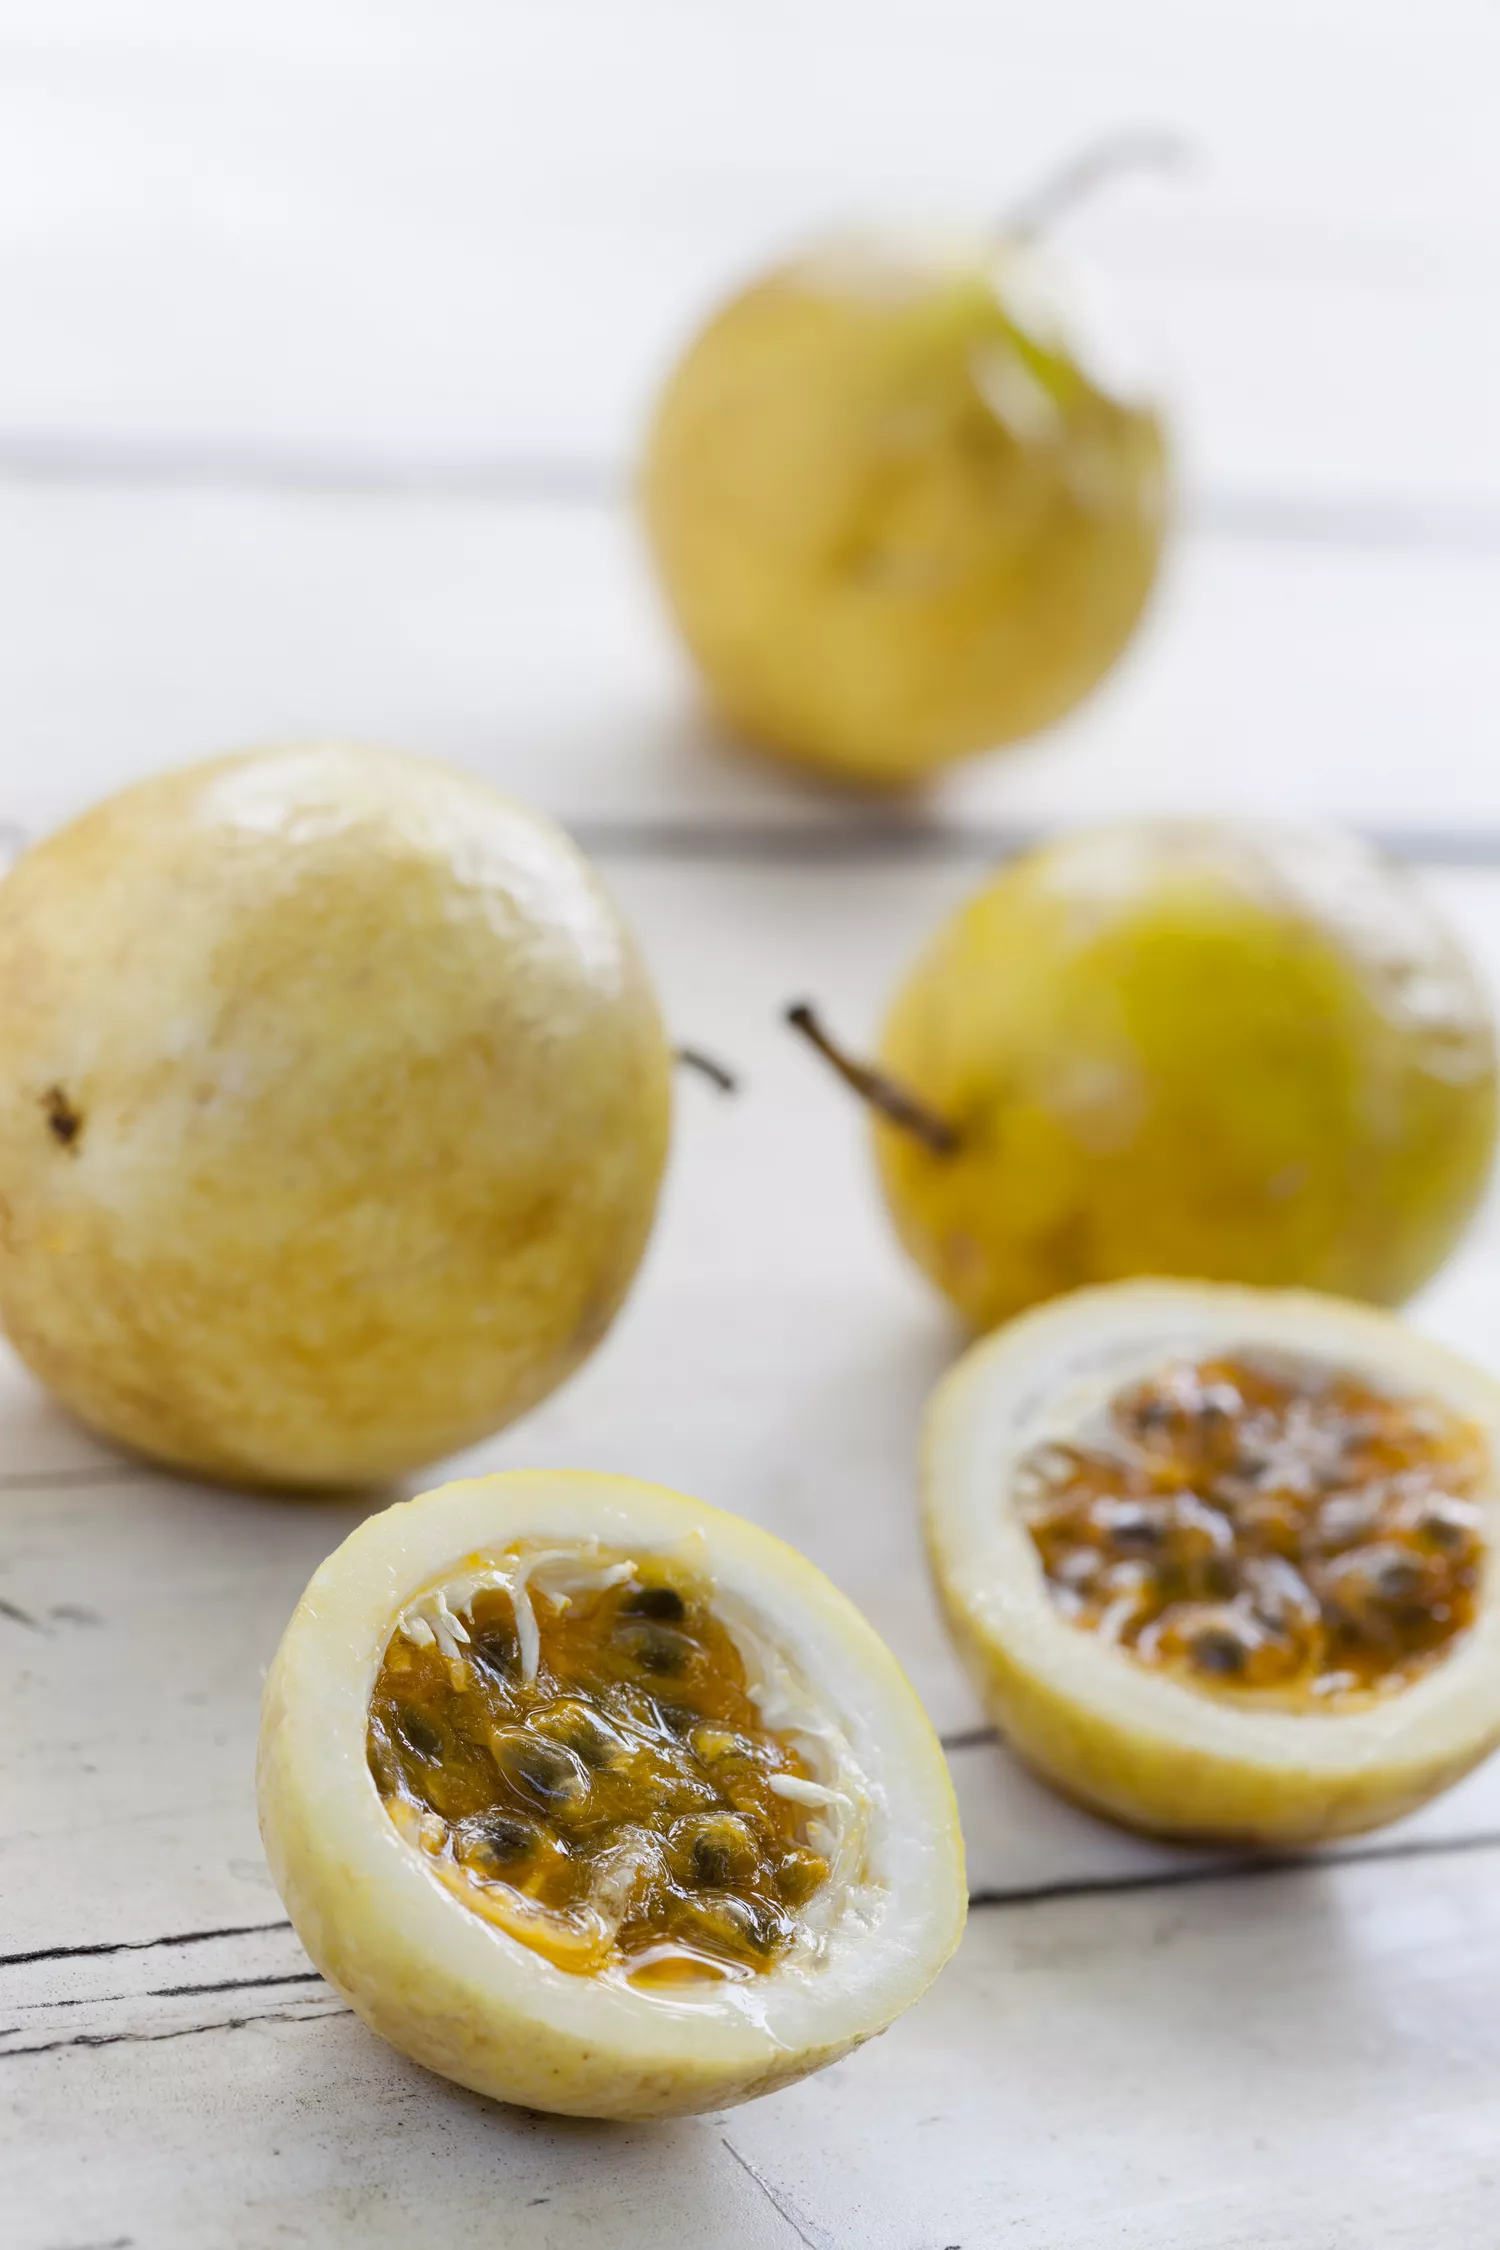 Passion fruit on a table.